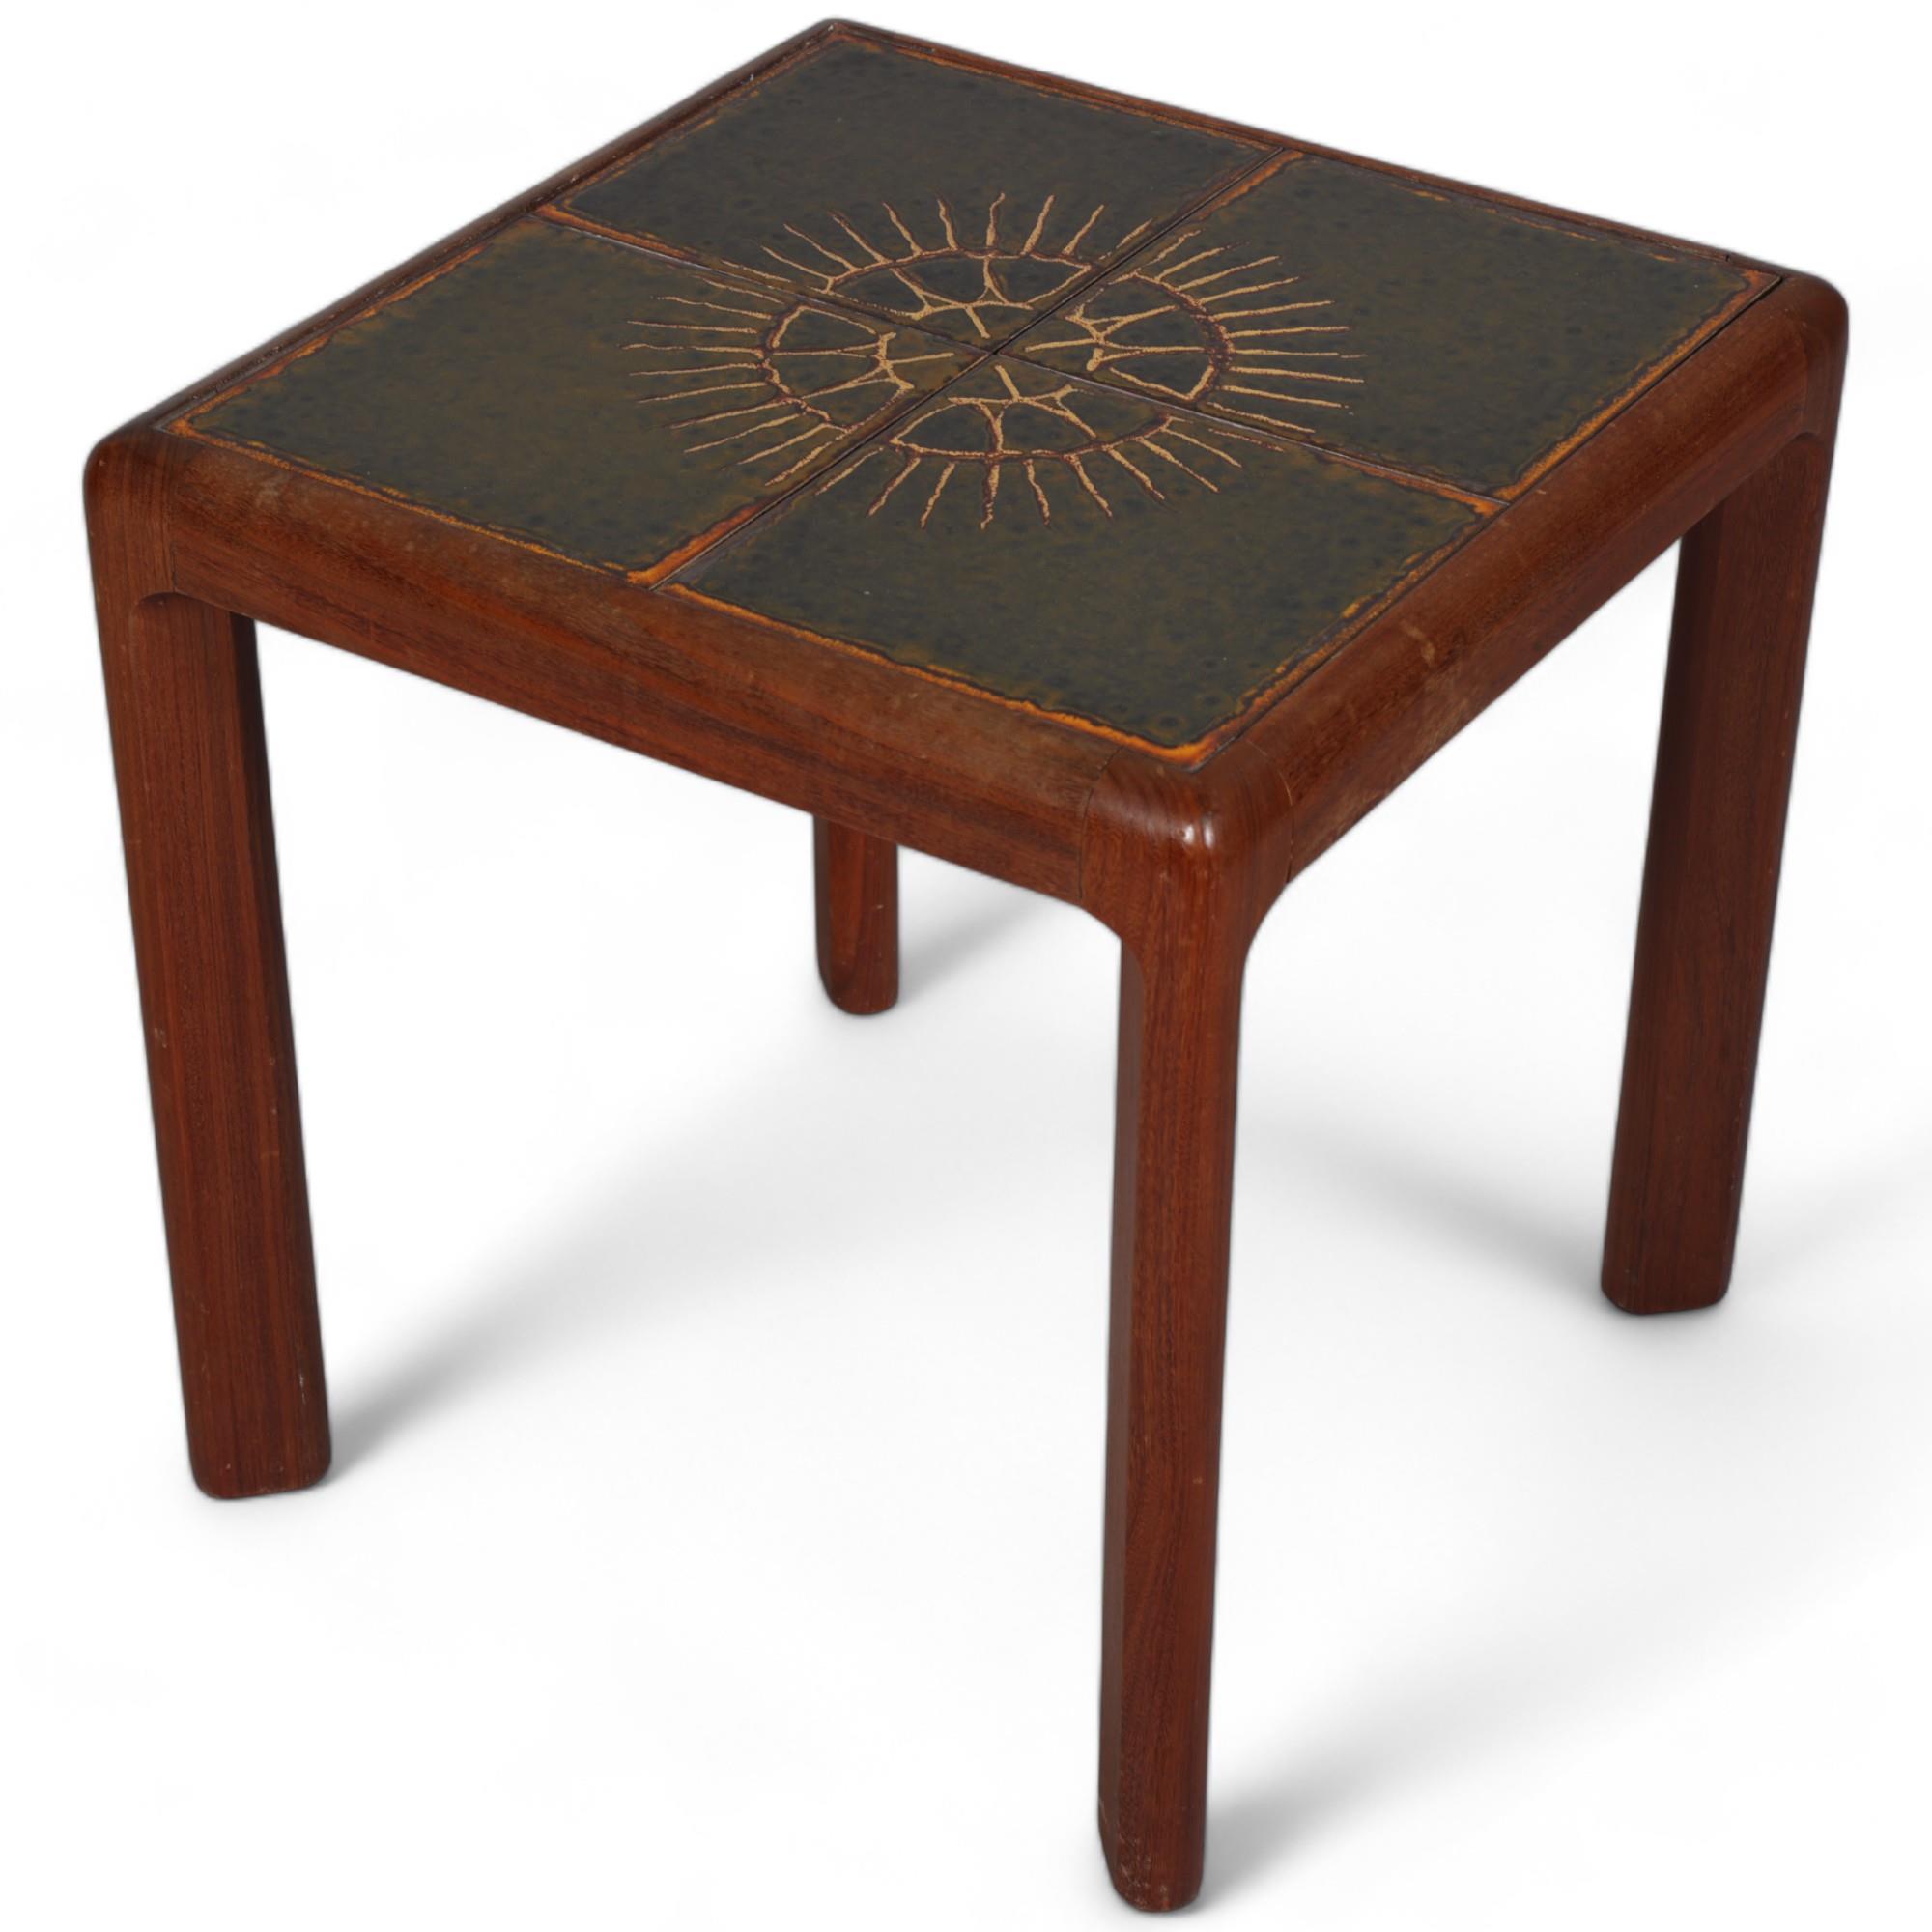 A mid 20th century teak and tile-top side table, height 44.5cm, top 44.5cm Sq Grout has perished